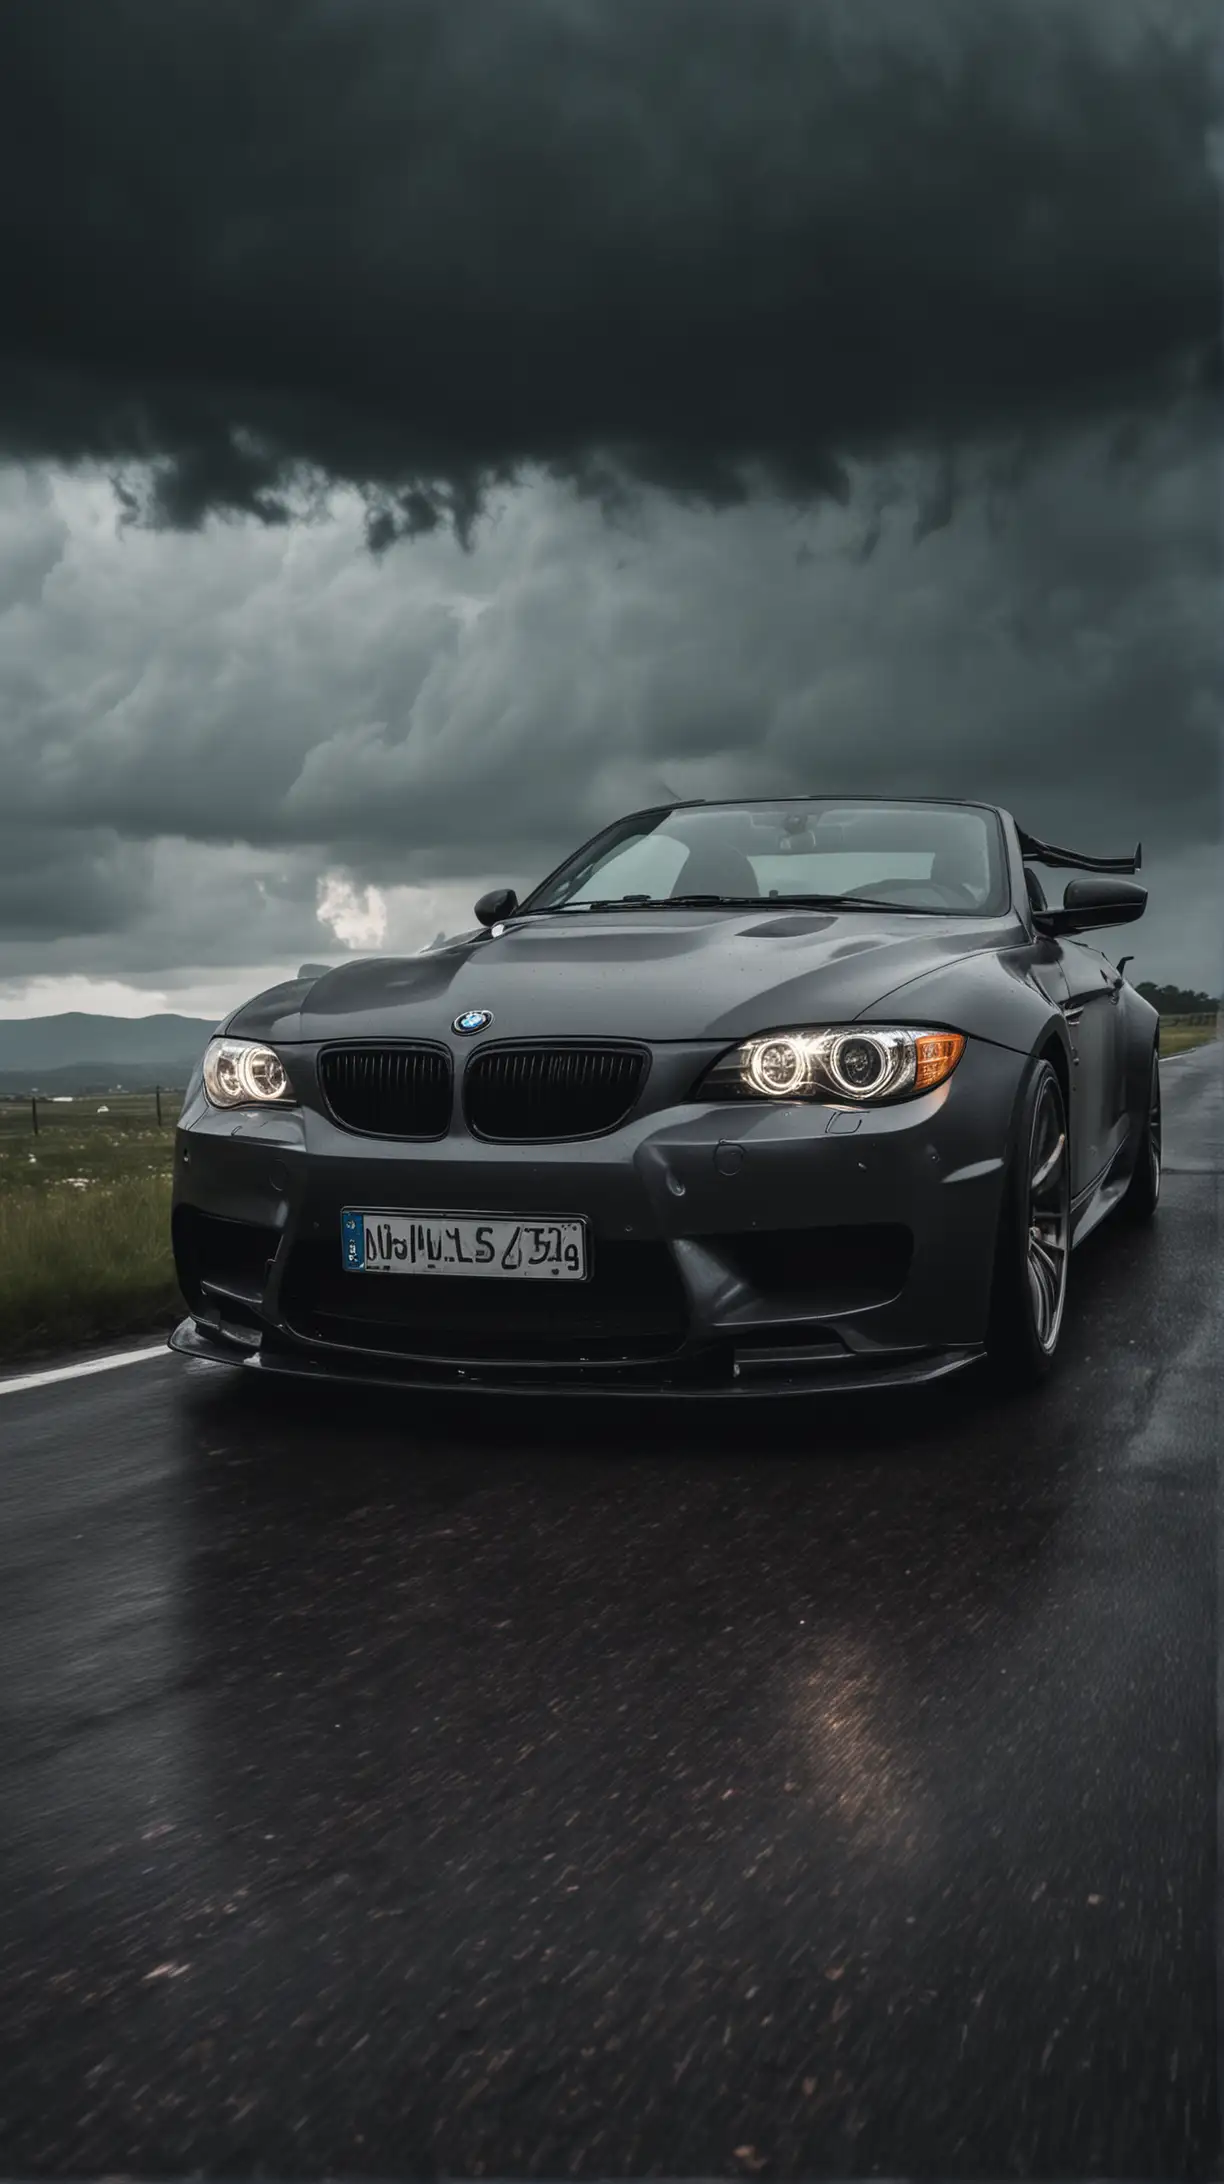 BMW Super Sports Car with Headlights Illuminated Against Dramatic Black Clouds